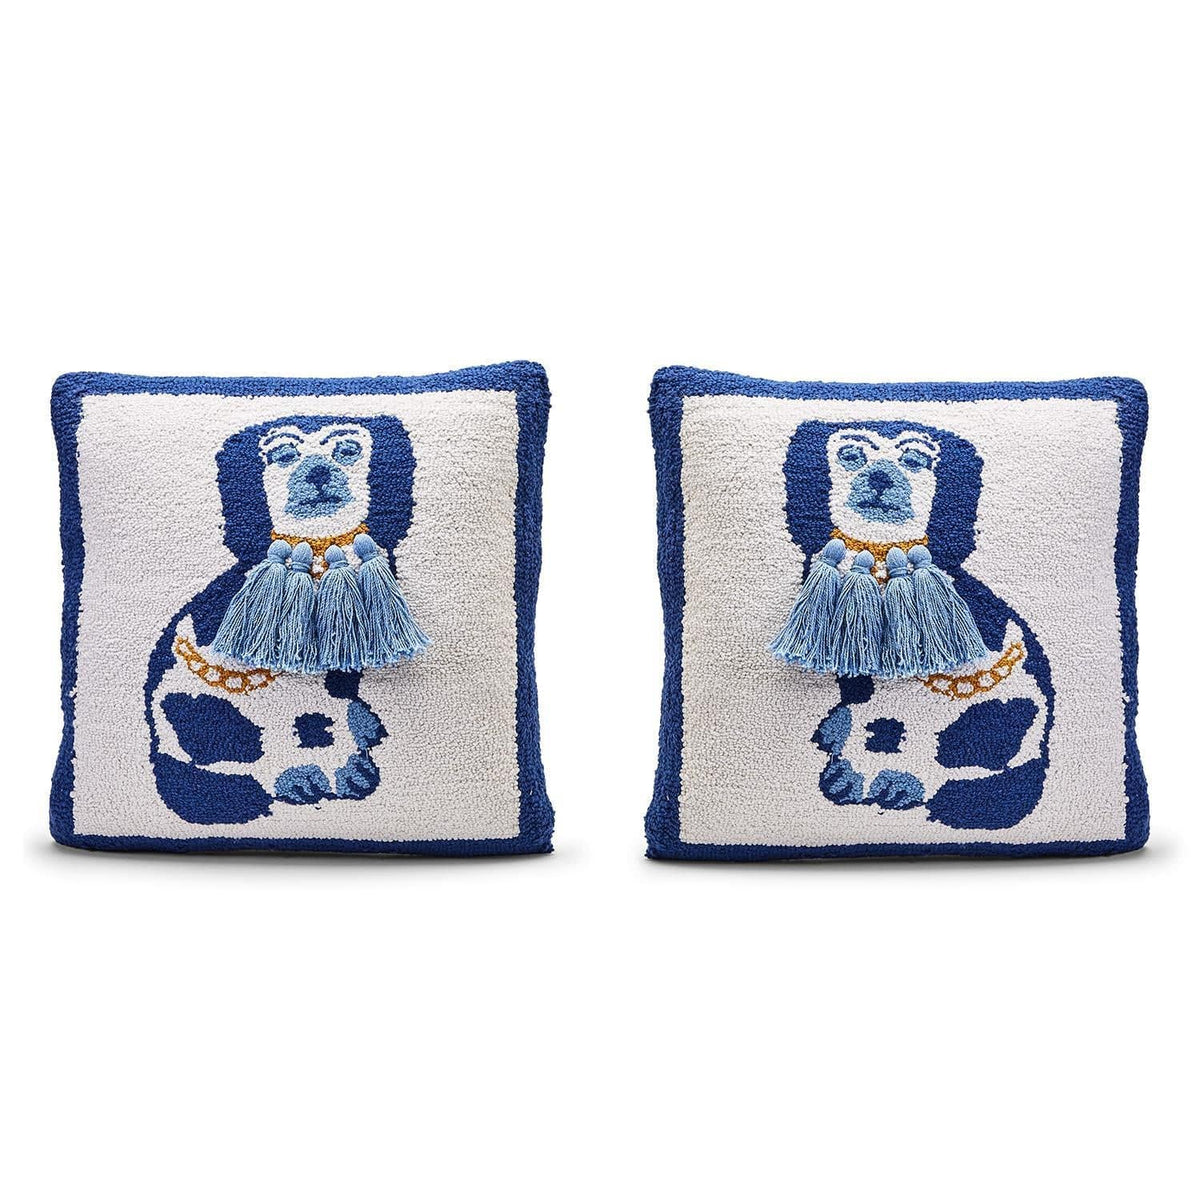 Staffordshire Dog Pillow - The Preppy Bunny